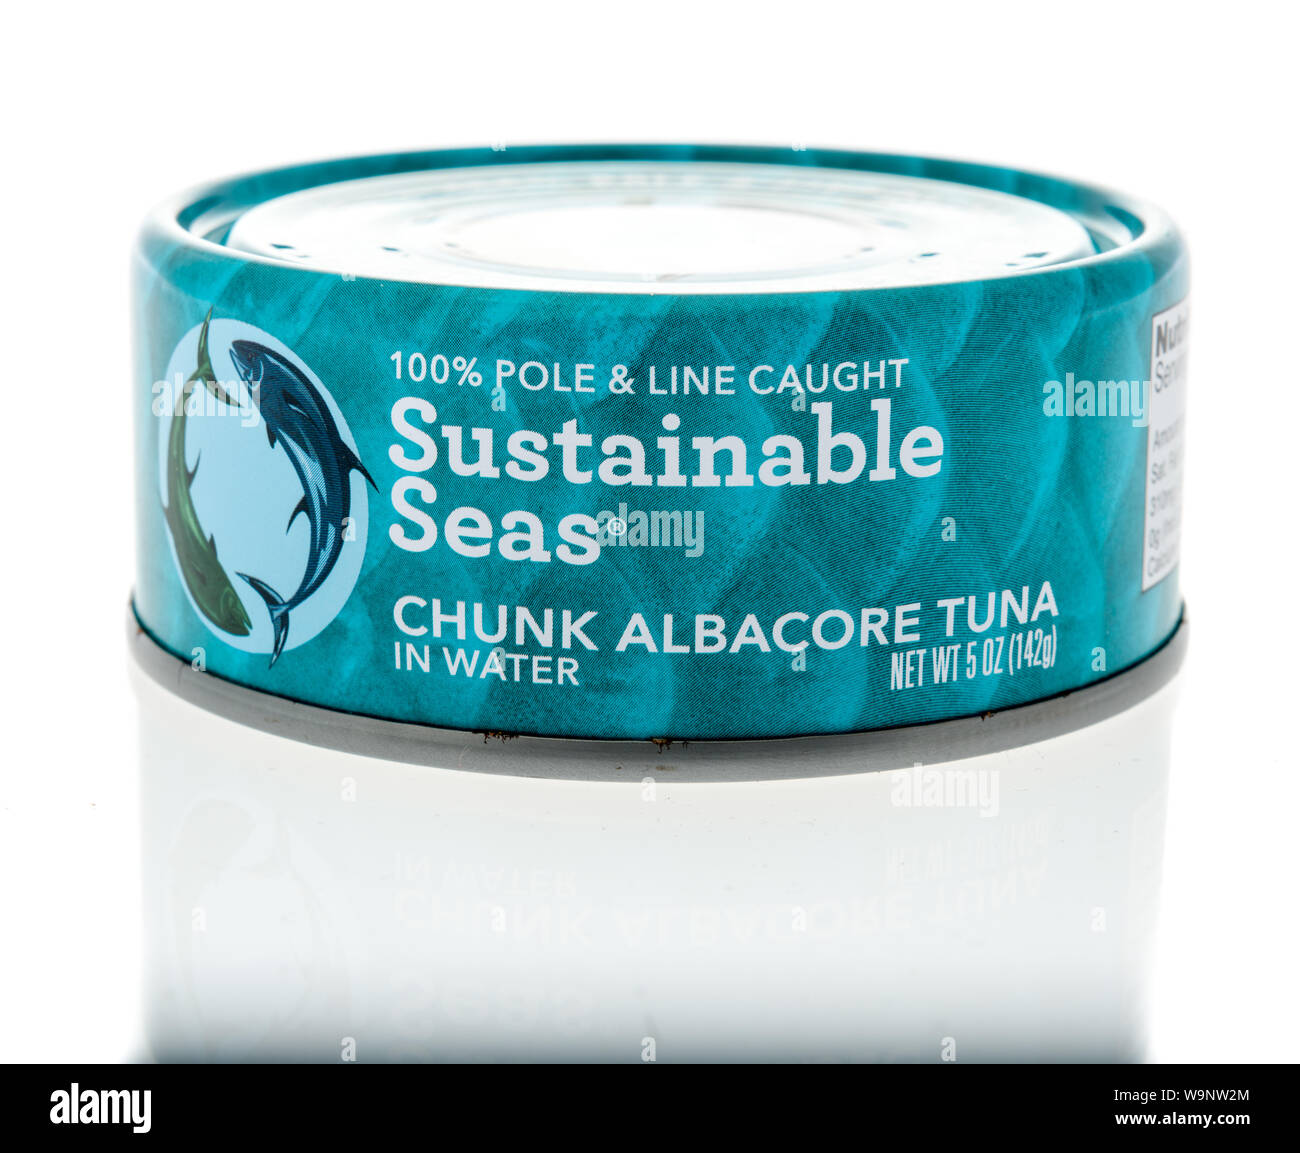 Winneconne, WI - 14 August 2019 : A package of Sustainable Seas albacore tuna on an isolated background Stock Photo